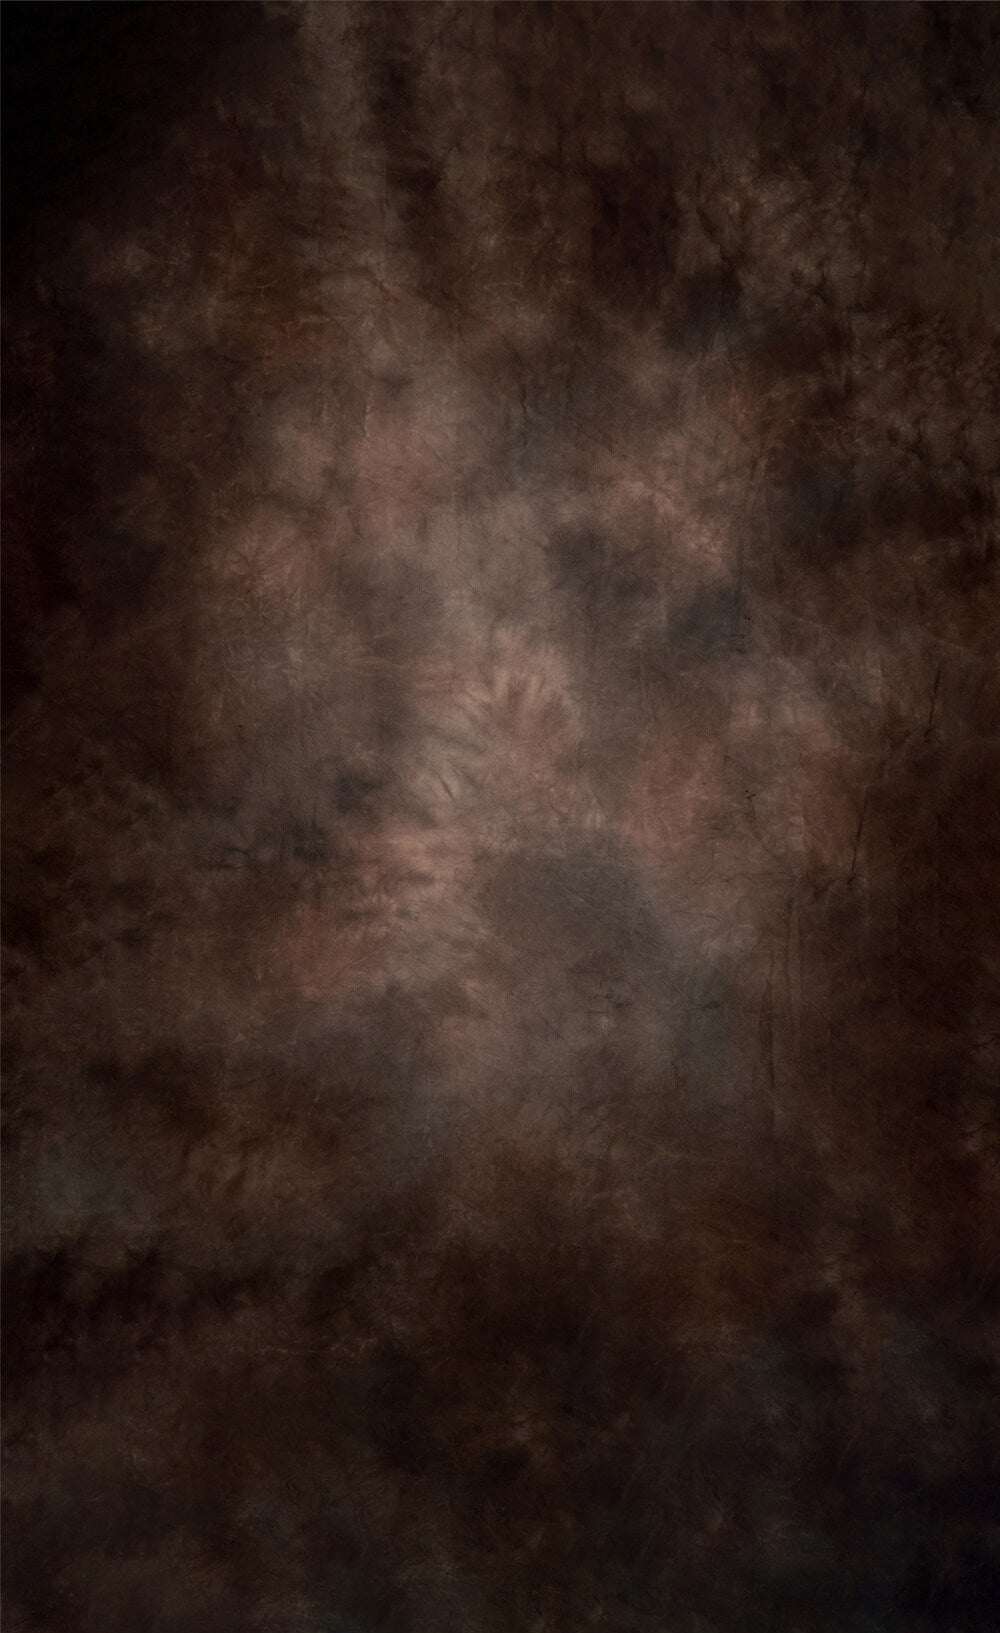 Vintage Brown Sweep Abstract Textured Backdrop MR-2153